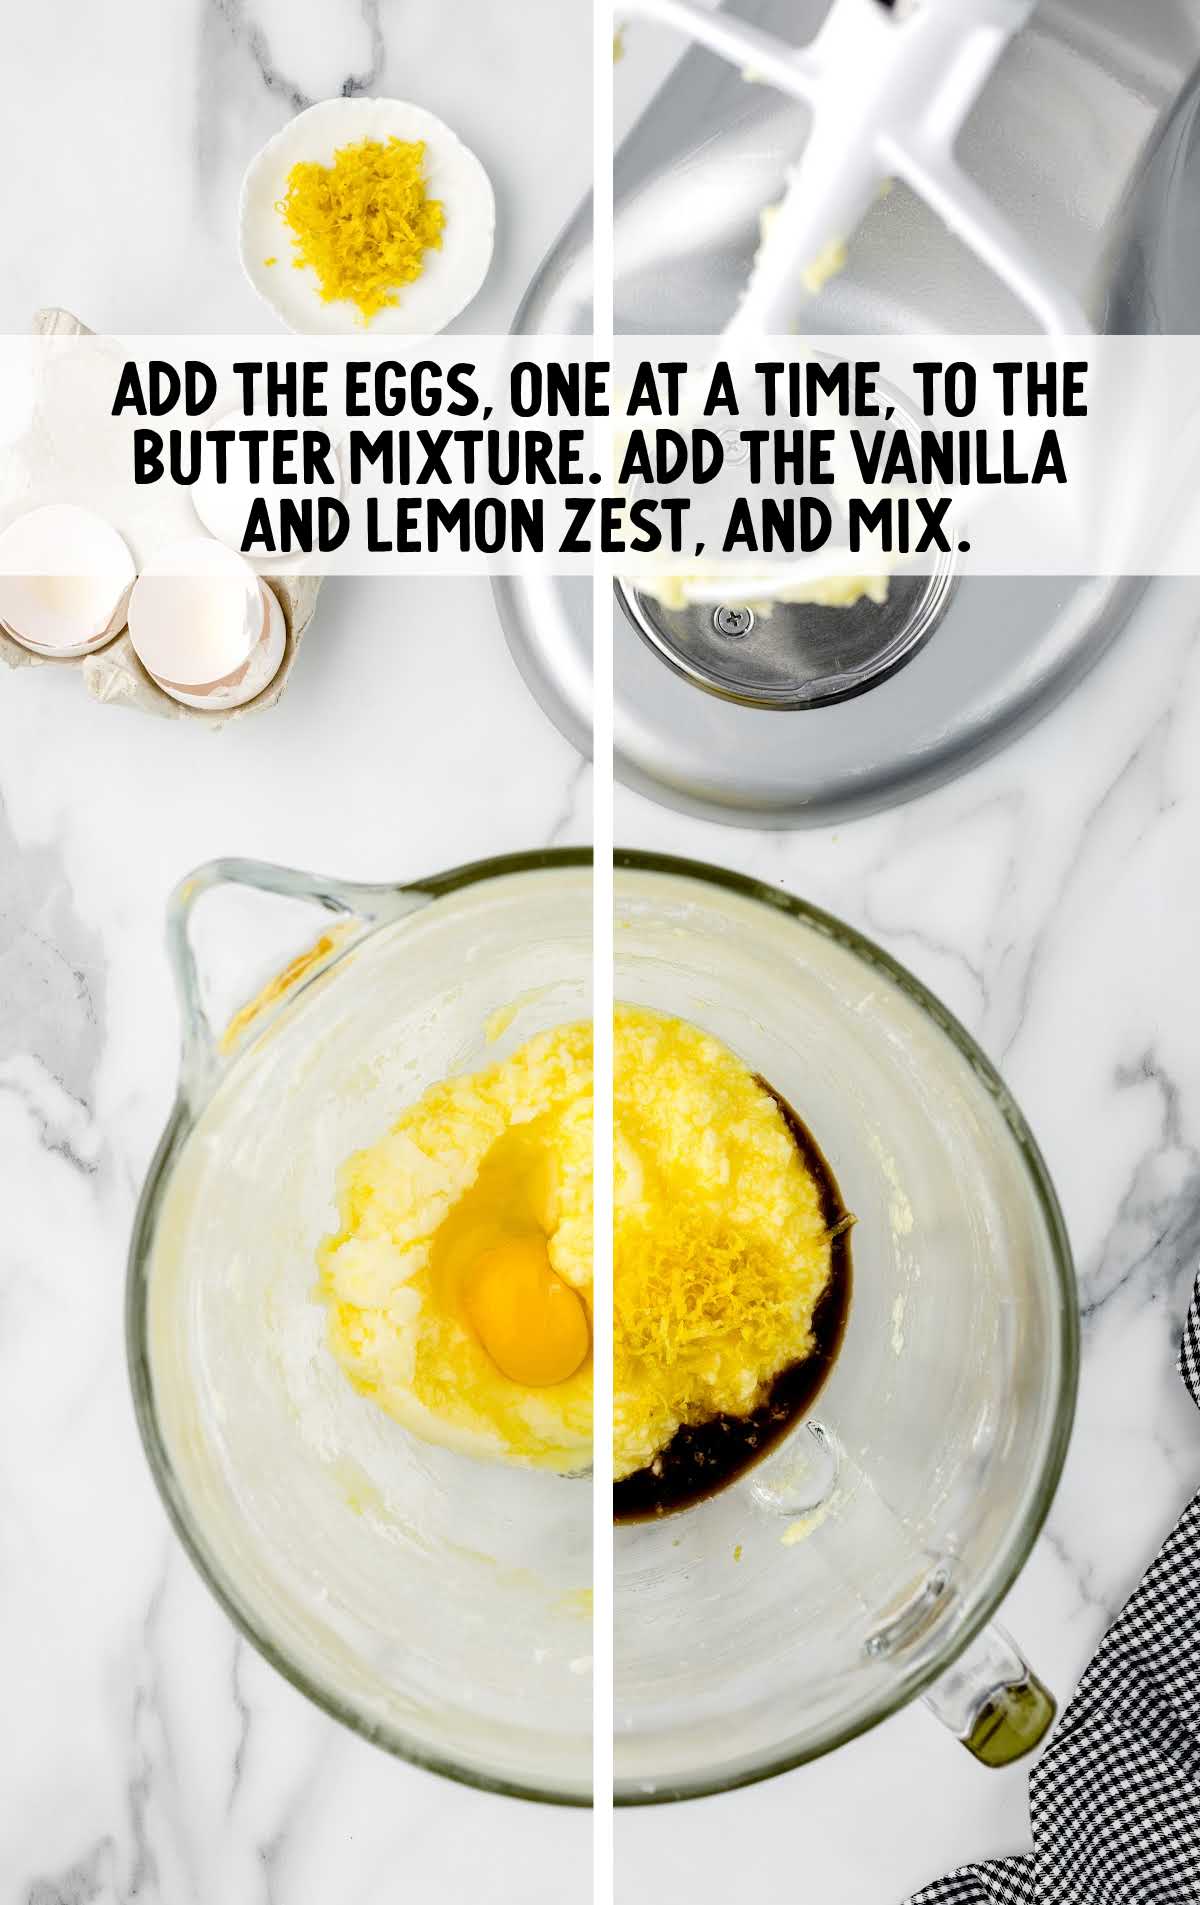 eggs, lemon zest, and vanilla added to the butter mixture